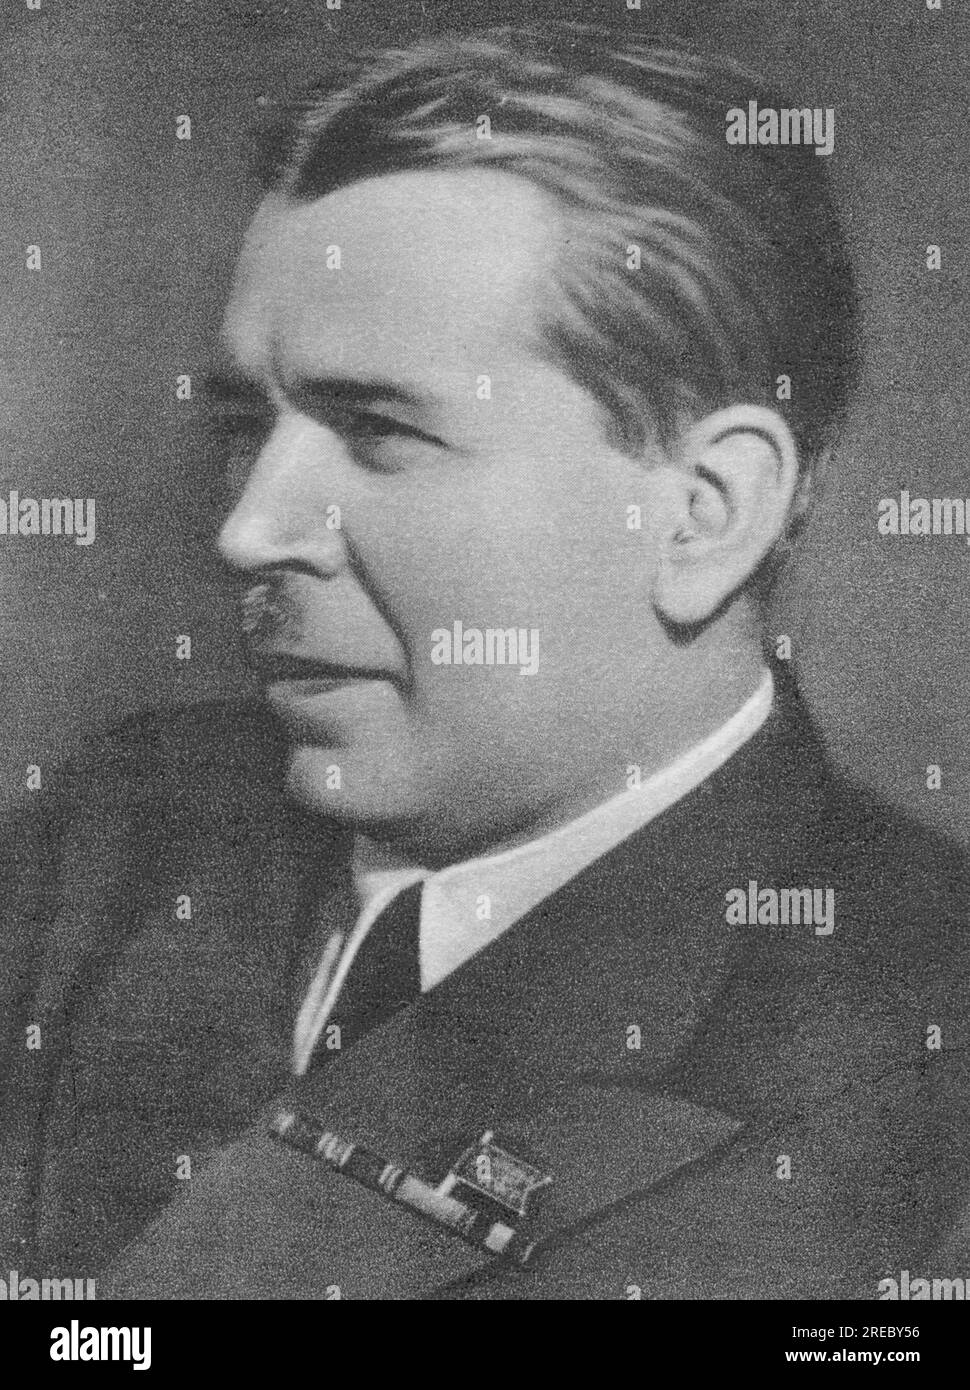 Wavilow, Sergej Iwanowitsch, 24.3.1891 - 25,1.1951, sowjetischer Physiker, Druck auf Foto, 1940er, ADDITIONAL-RIGHTS-CLEARANCE-INFO-NOT-AVAILABLE Stockfoto